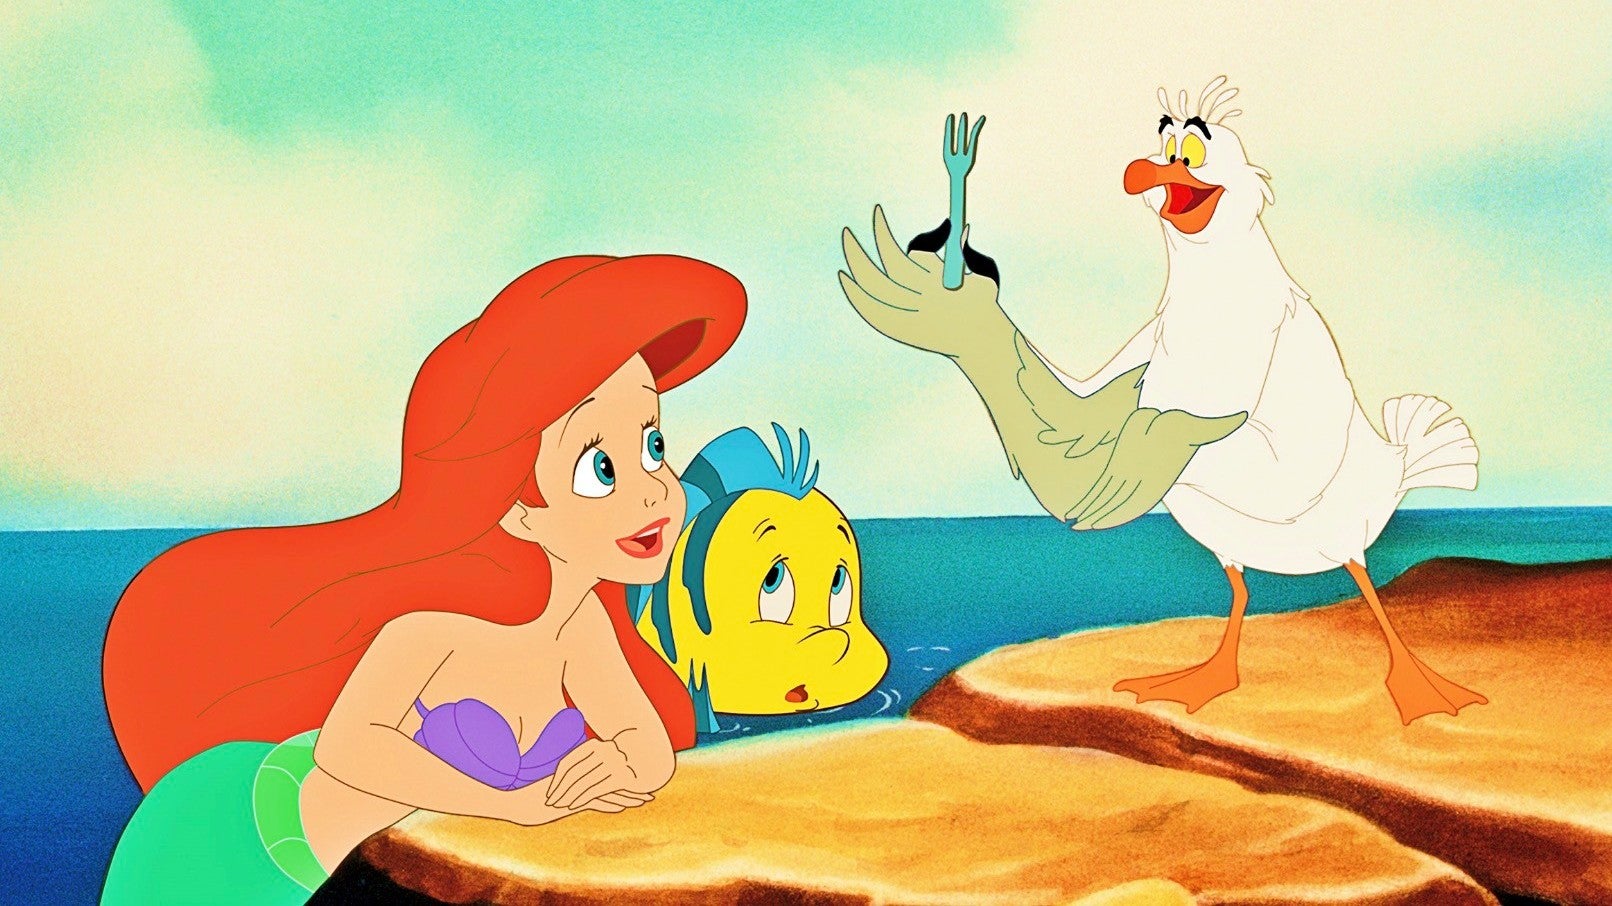 The Little Mermaid Remake Catches A Fish And A Seagull